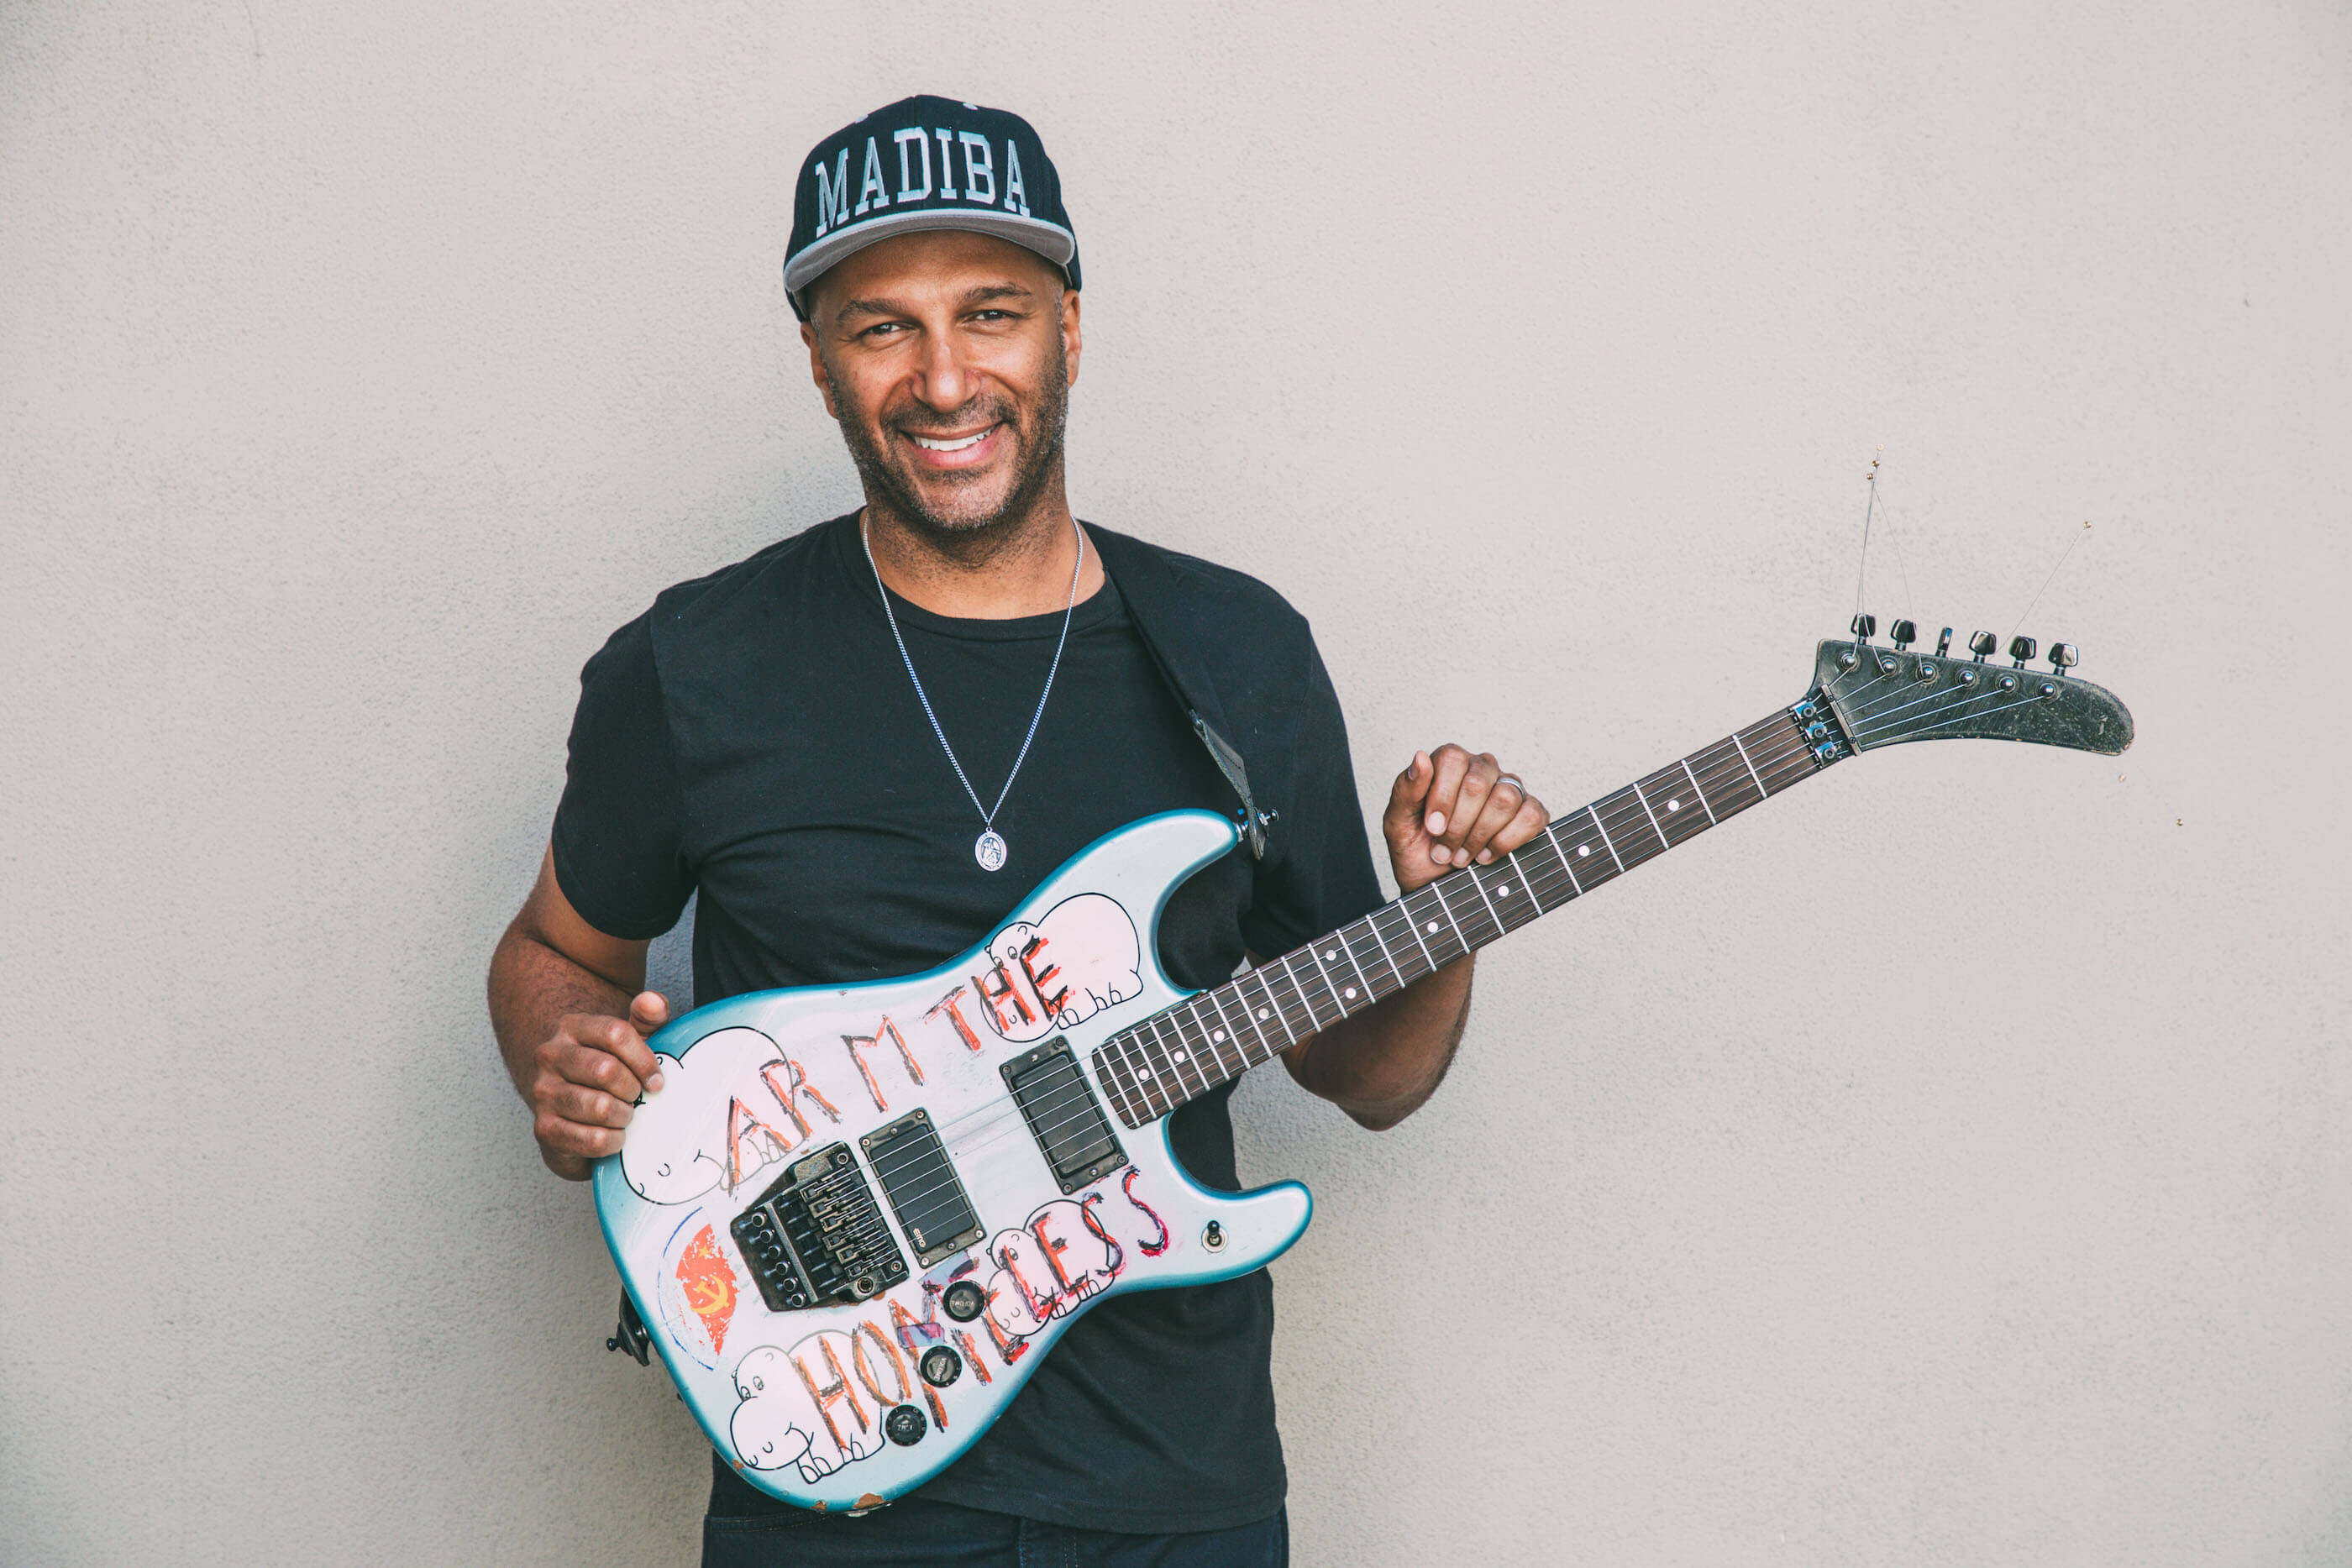 Author Tom Morello will discuss his new book, "Whatever iI Takes"